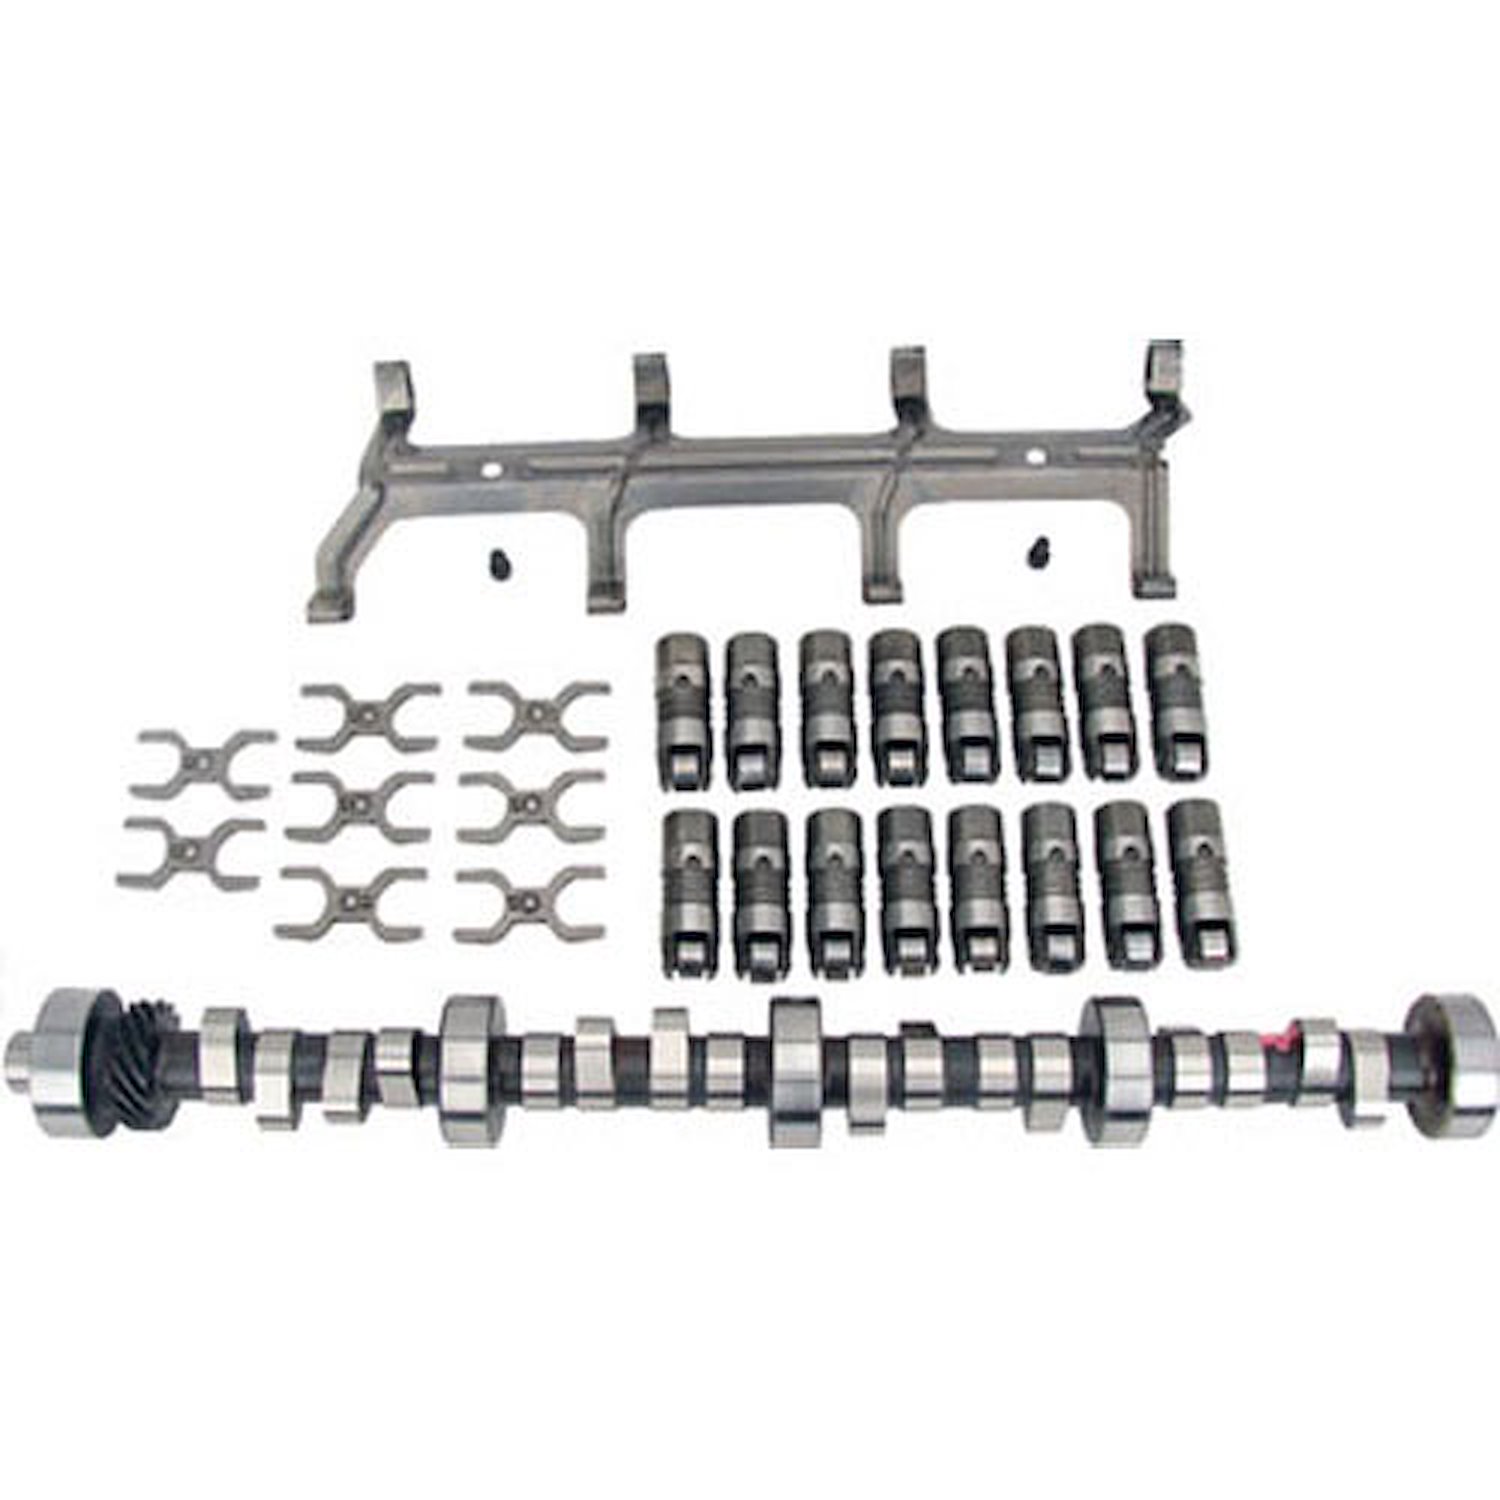 Magnum Hydraulic Roller Camshaft and Lifte Kit Ford 351C, 351M-400M 1970-82 Retro Fit Lift: .566"/.566"